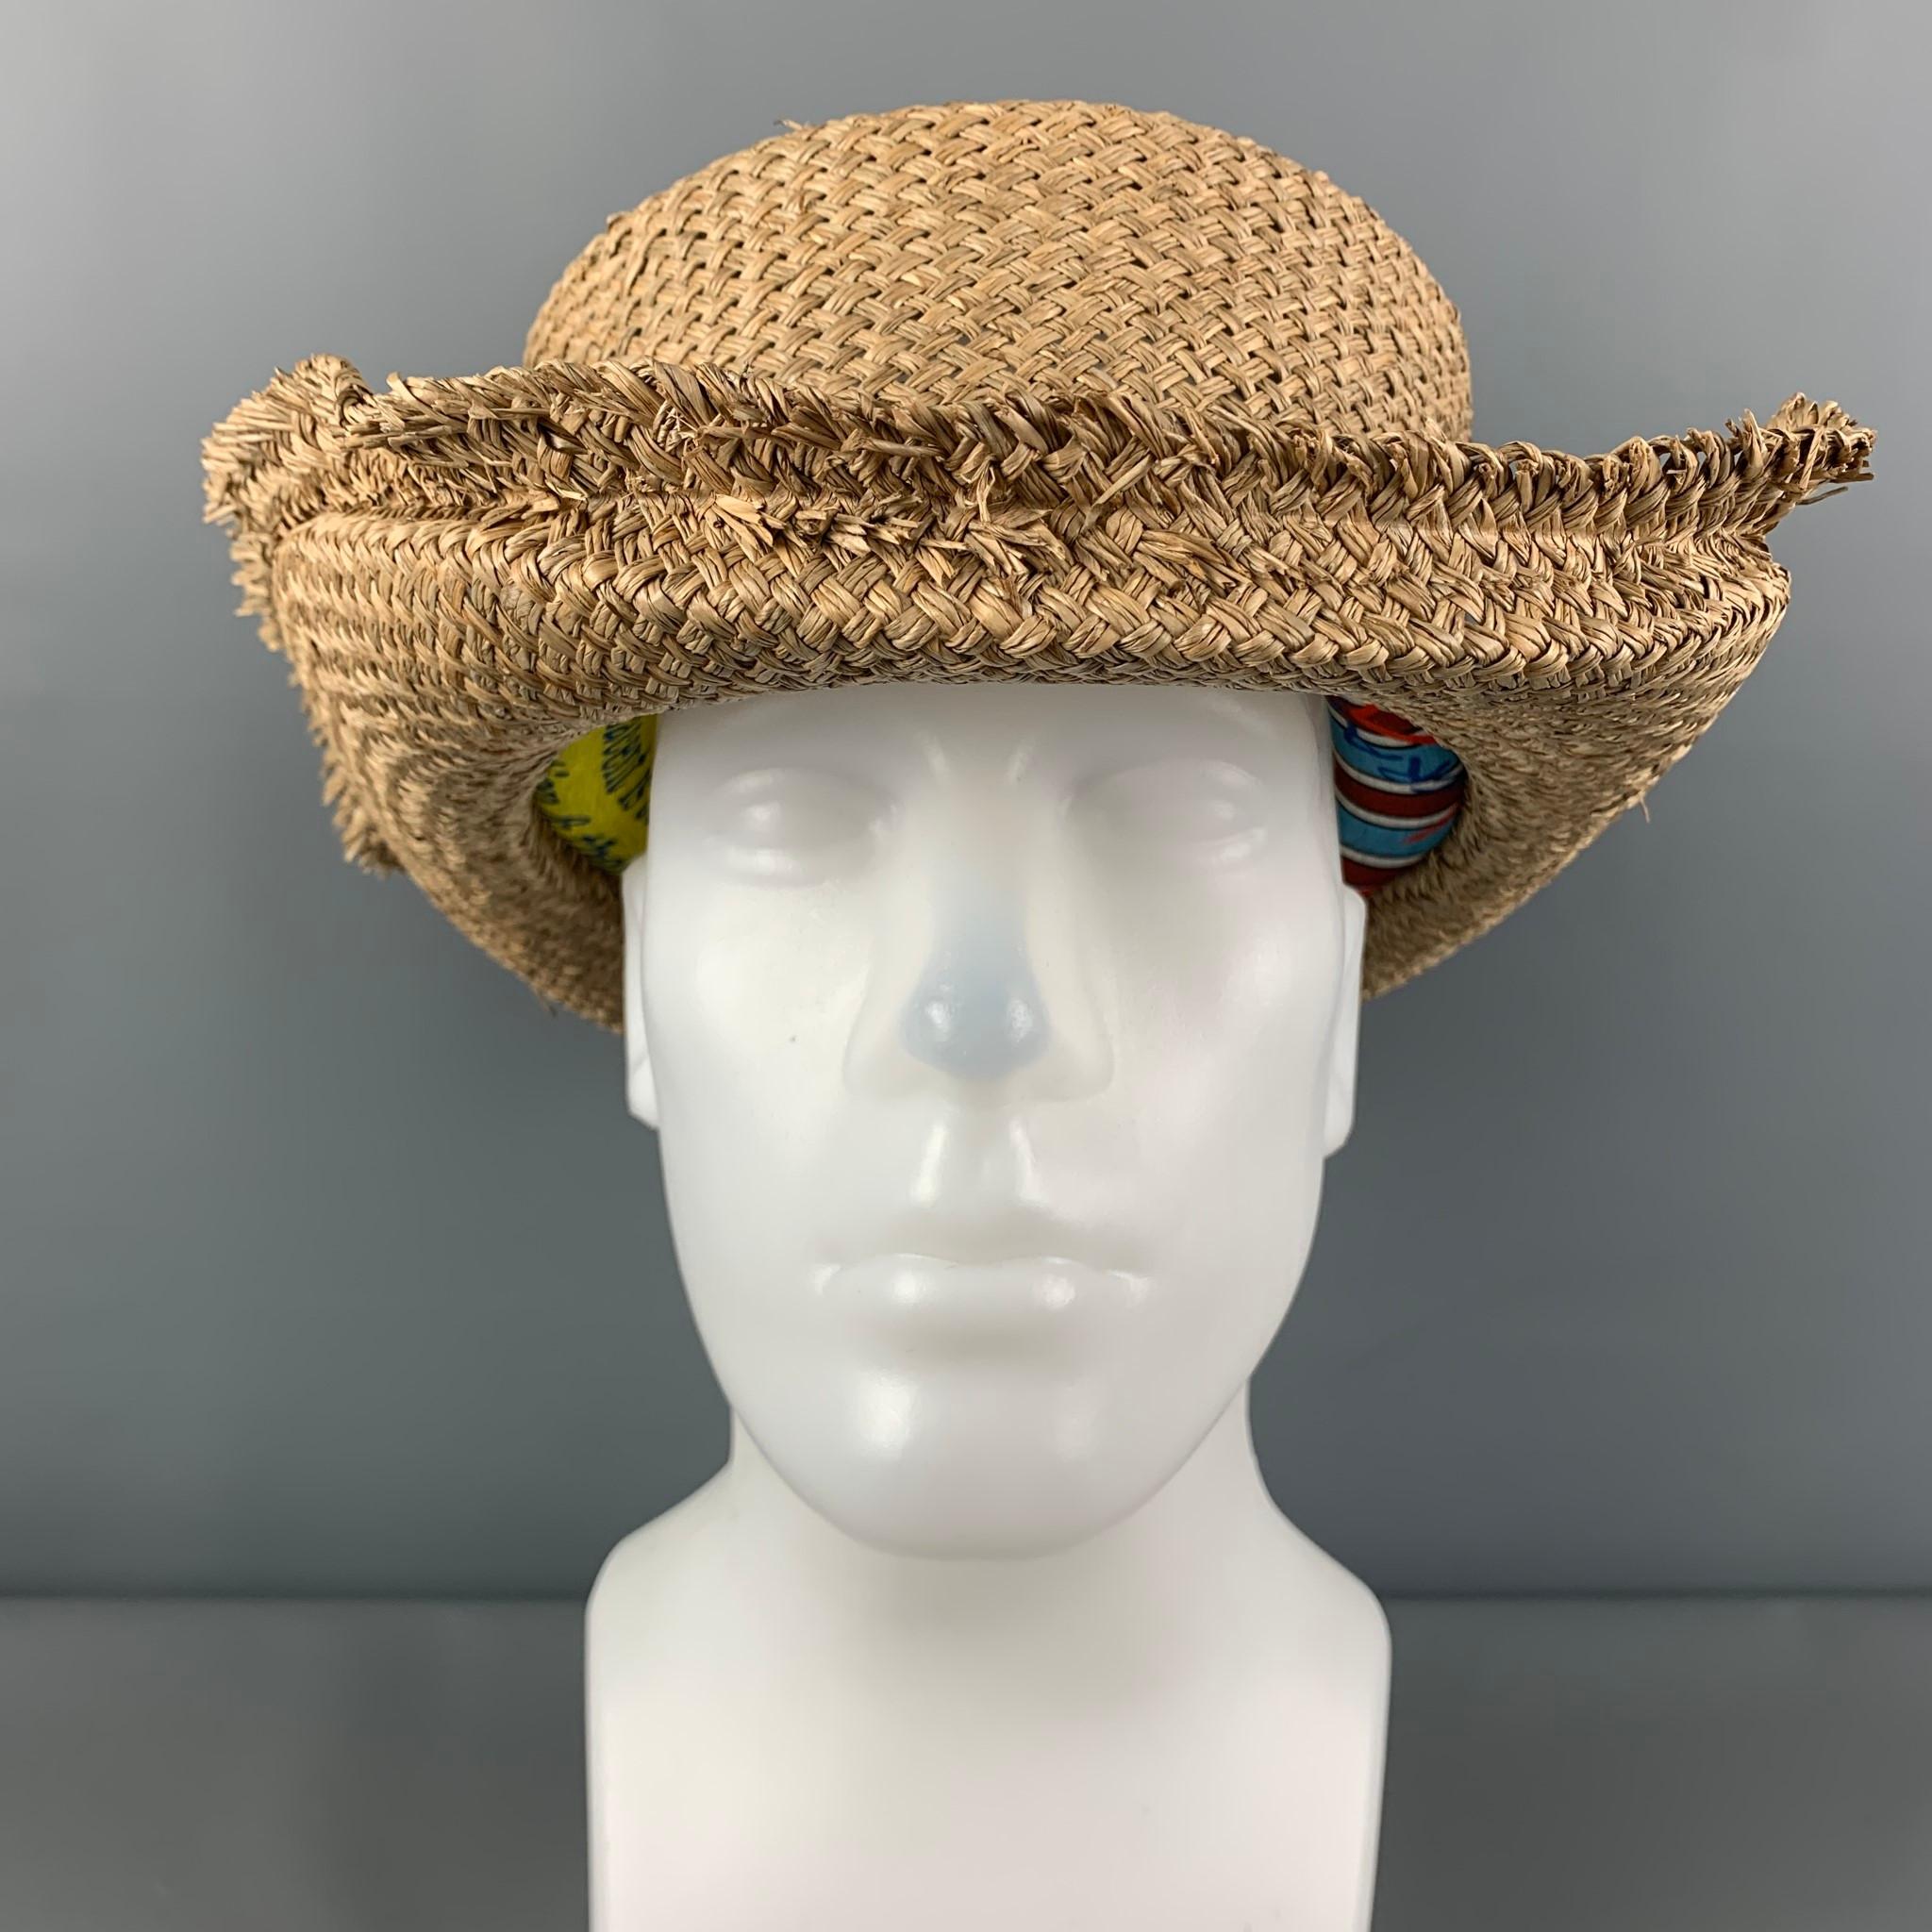 VIVIENNE WESTWOOD hat comes in a natural woven straw material featuring a raw edge and a inner multi-color cushion detail. 

Very Good Pre-Owned Condition.
Marked: Size tag removed.

Measurements:

Opening: 25.5 in.
Brim: 3.5 in.
Height: 4 in.